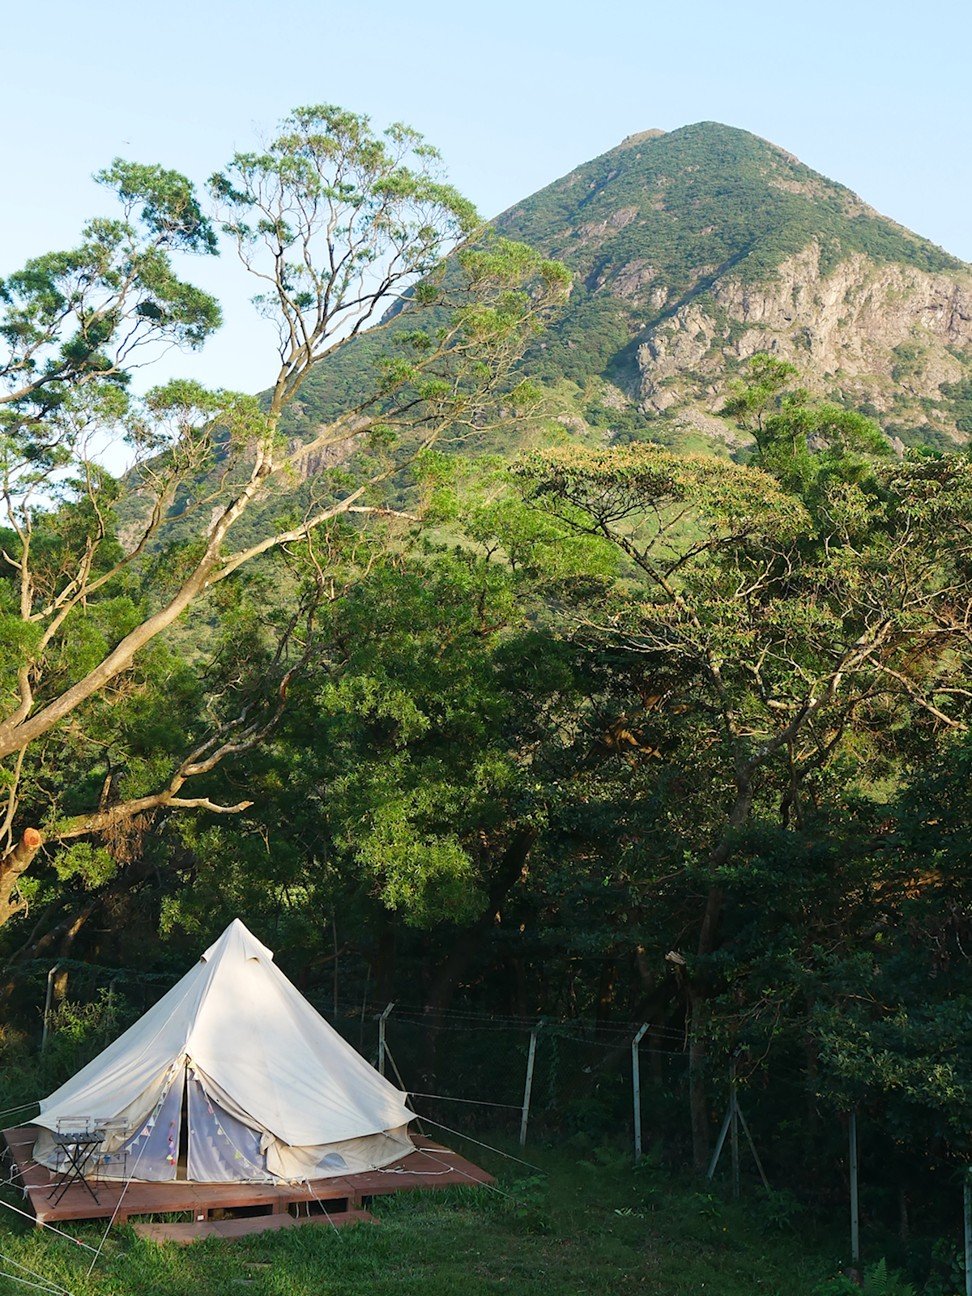 One of the glamping bell tents at YHA’s Ngong Ping campsite, with Lantau Peak in the background.Photo: Stuart Heaver